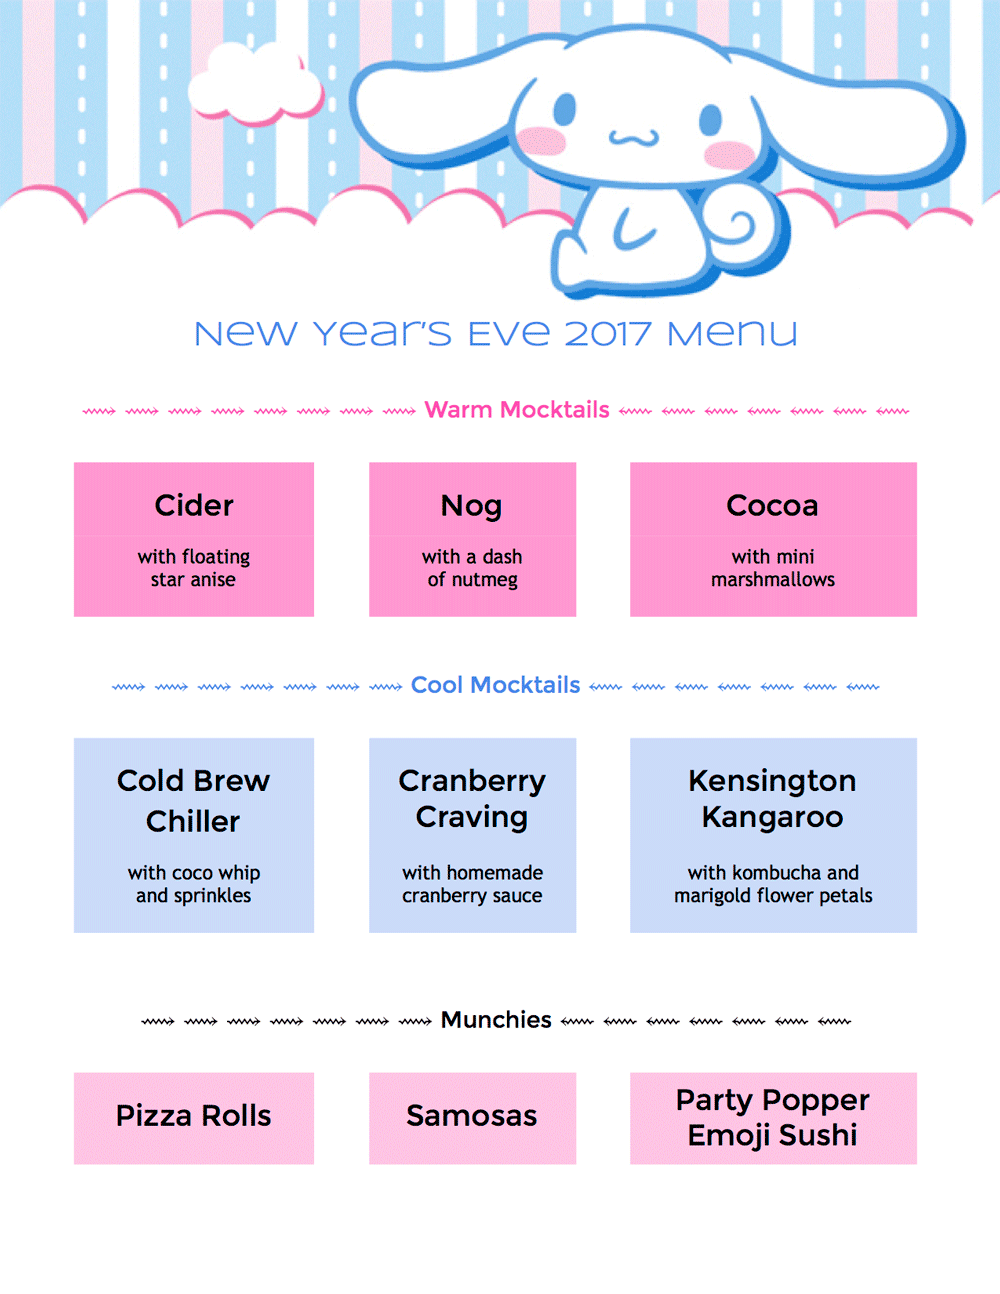 vegan menu for a new years eve party